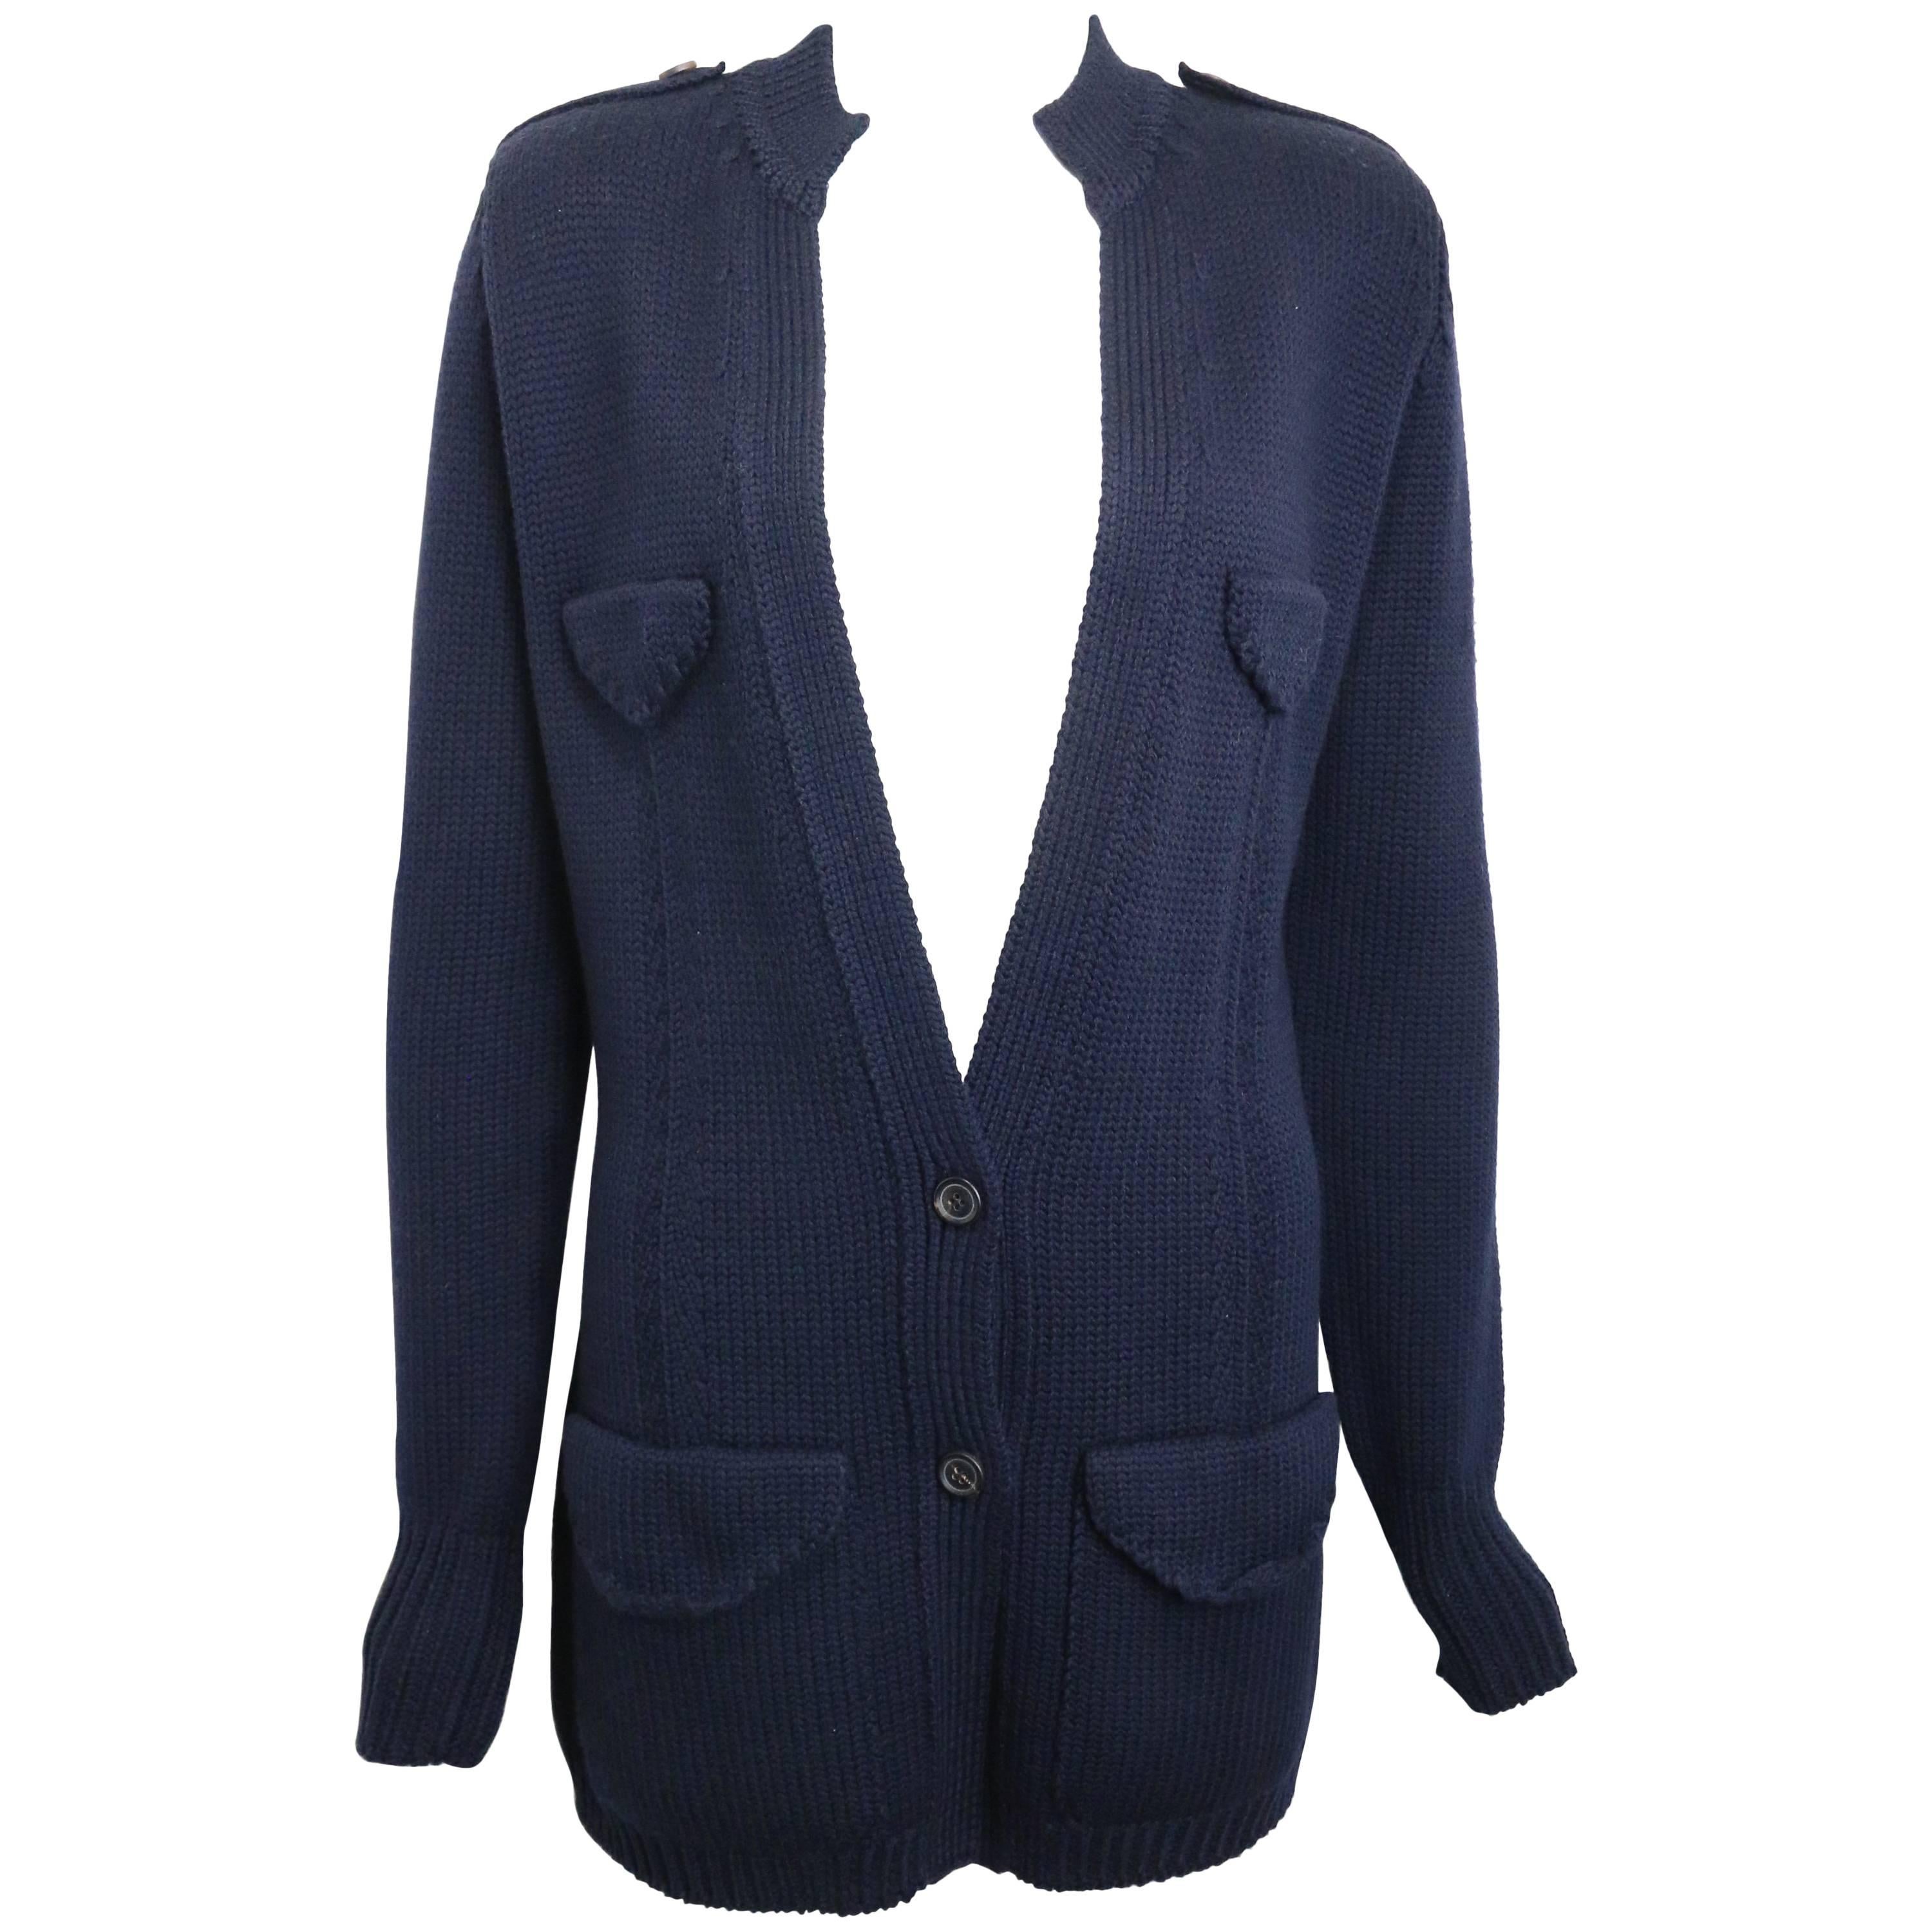 Herbst 1996 Gucci by Tom Ford Dunkle Marineblaue Strickjacke aus Wolle 